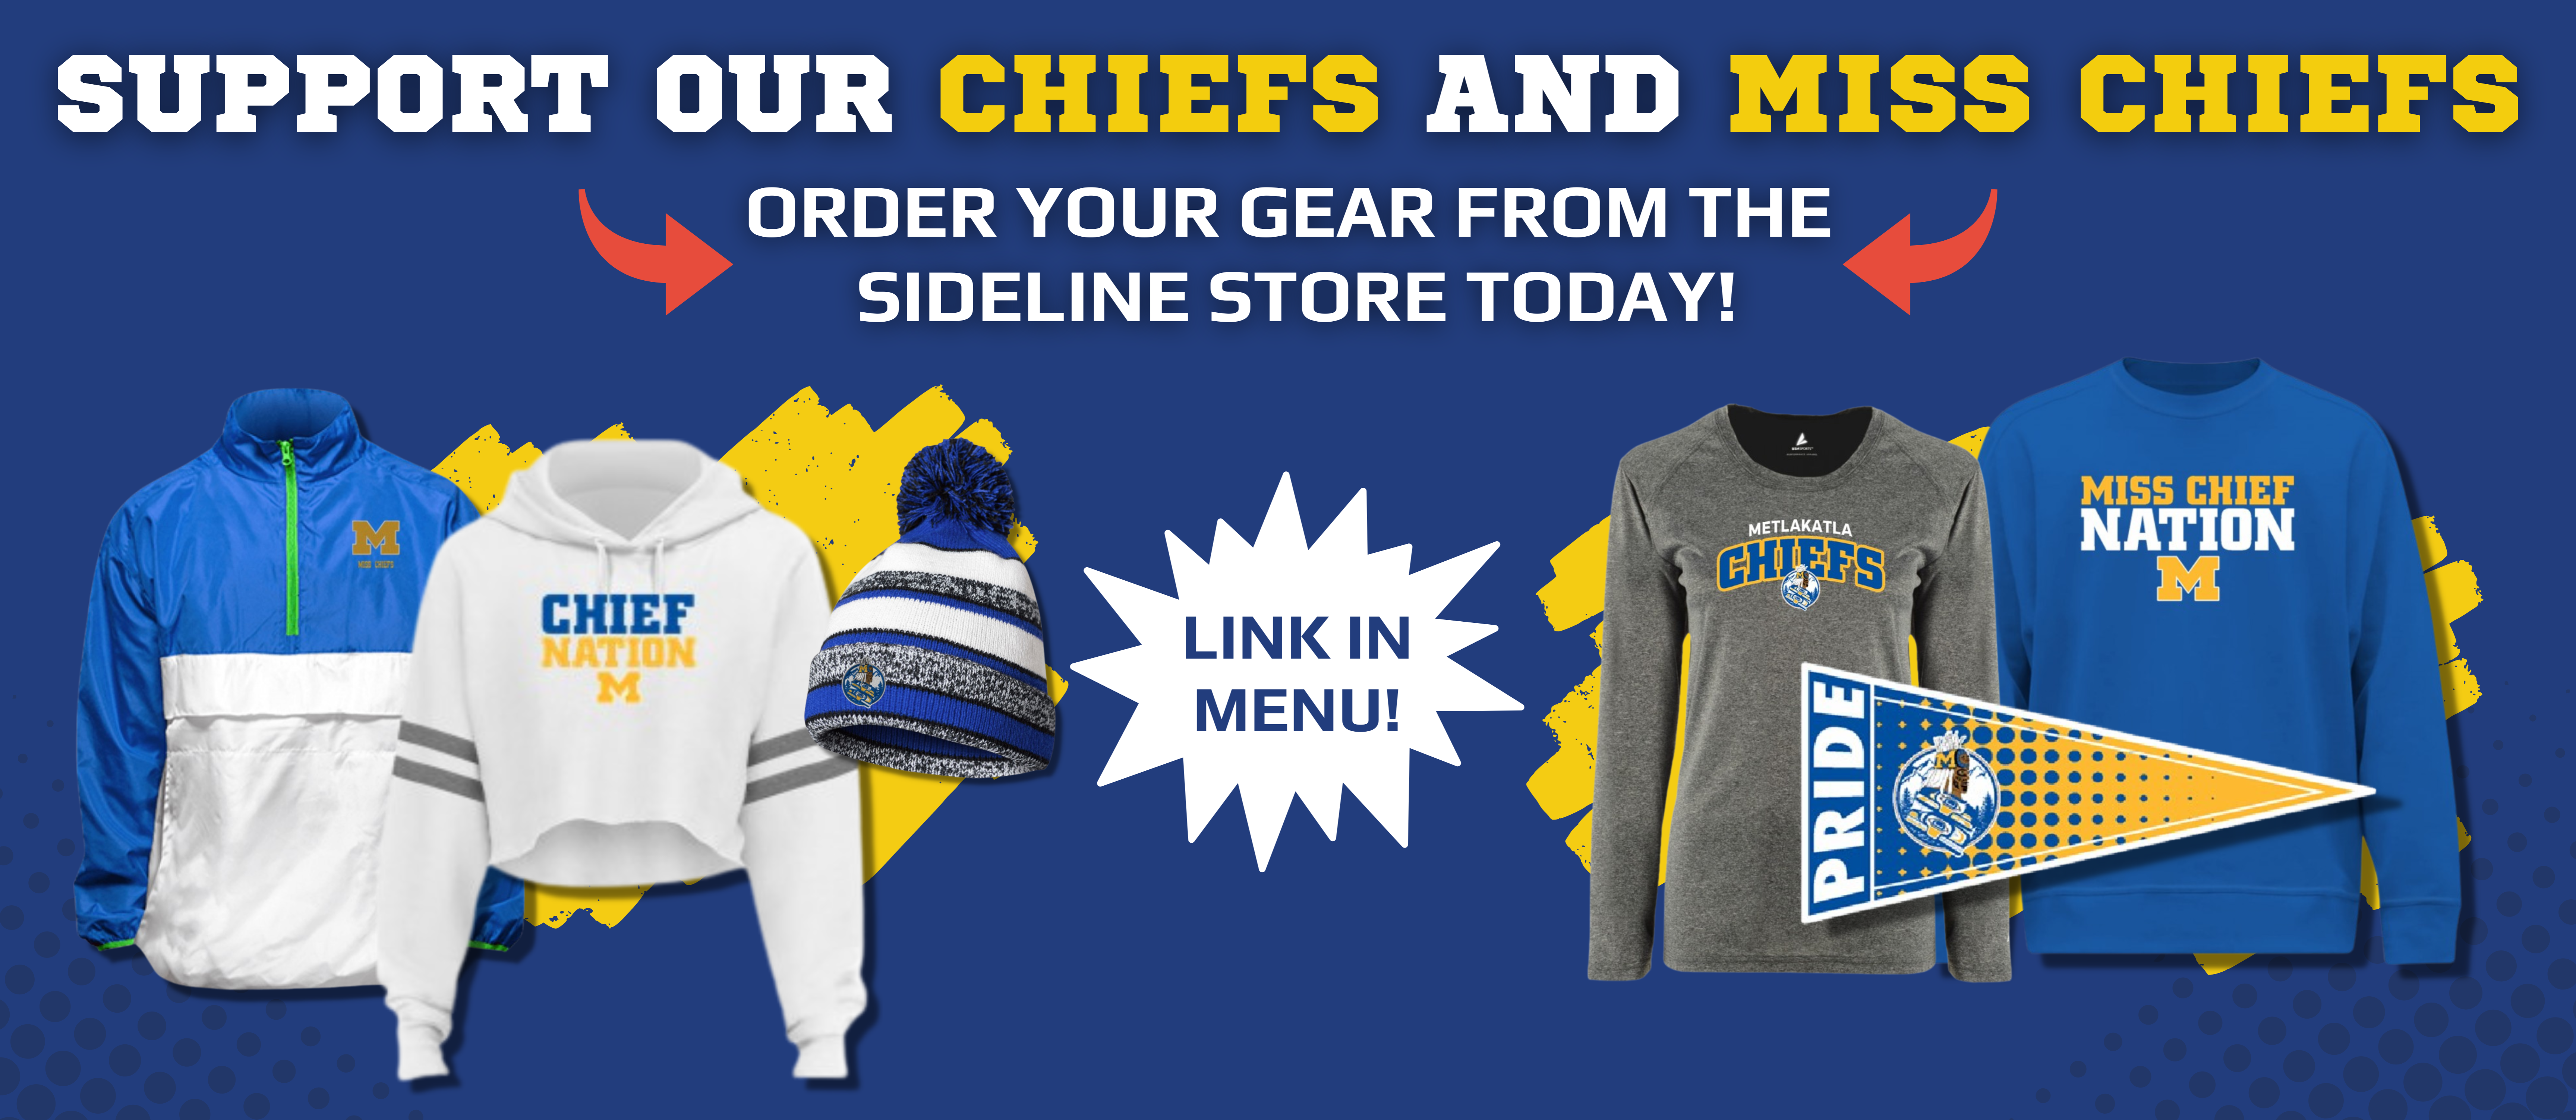 graphic with support our chiefs and miss chiefs- order your gear from the sidelines store today! with various sweatshirts, a t-shirt and hat with MHS logos